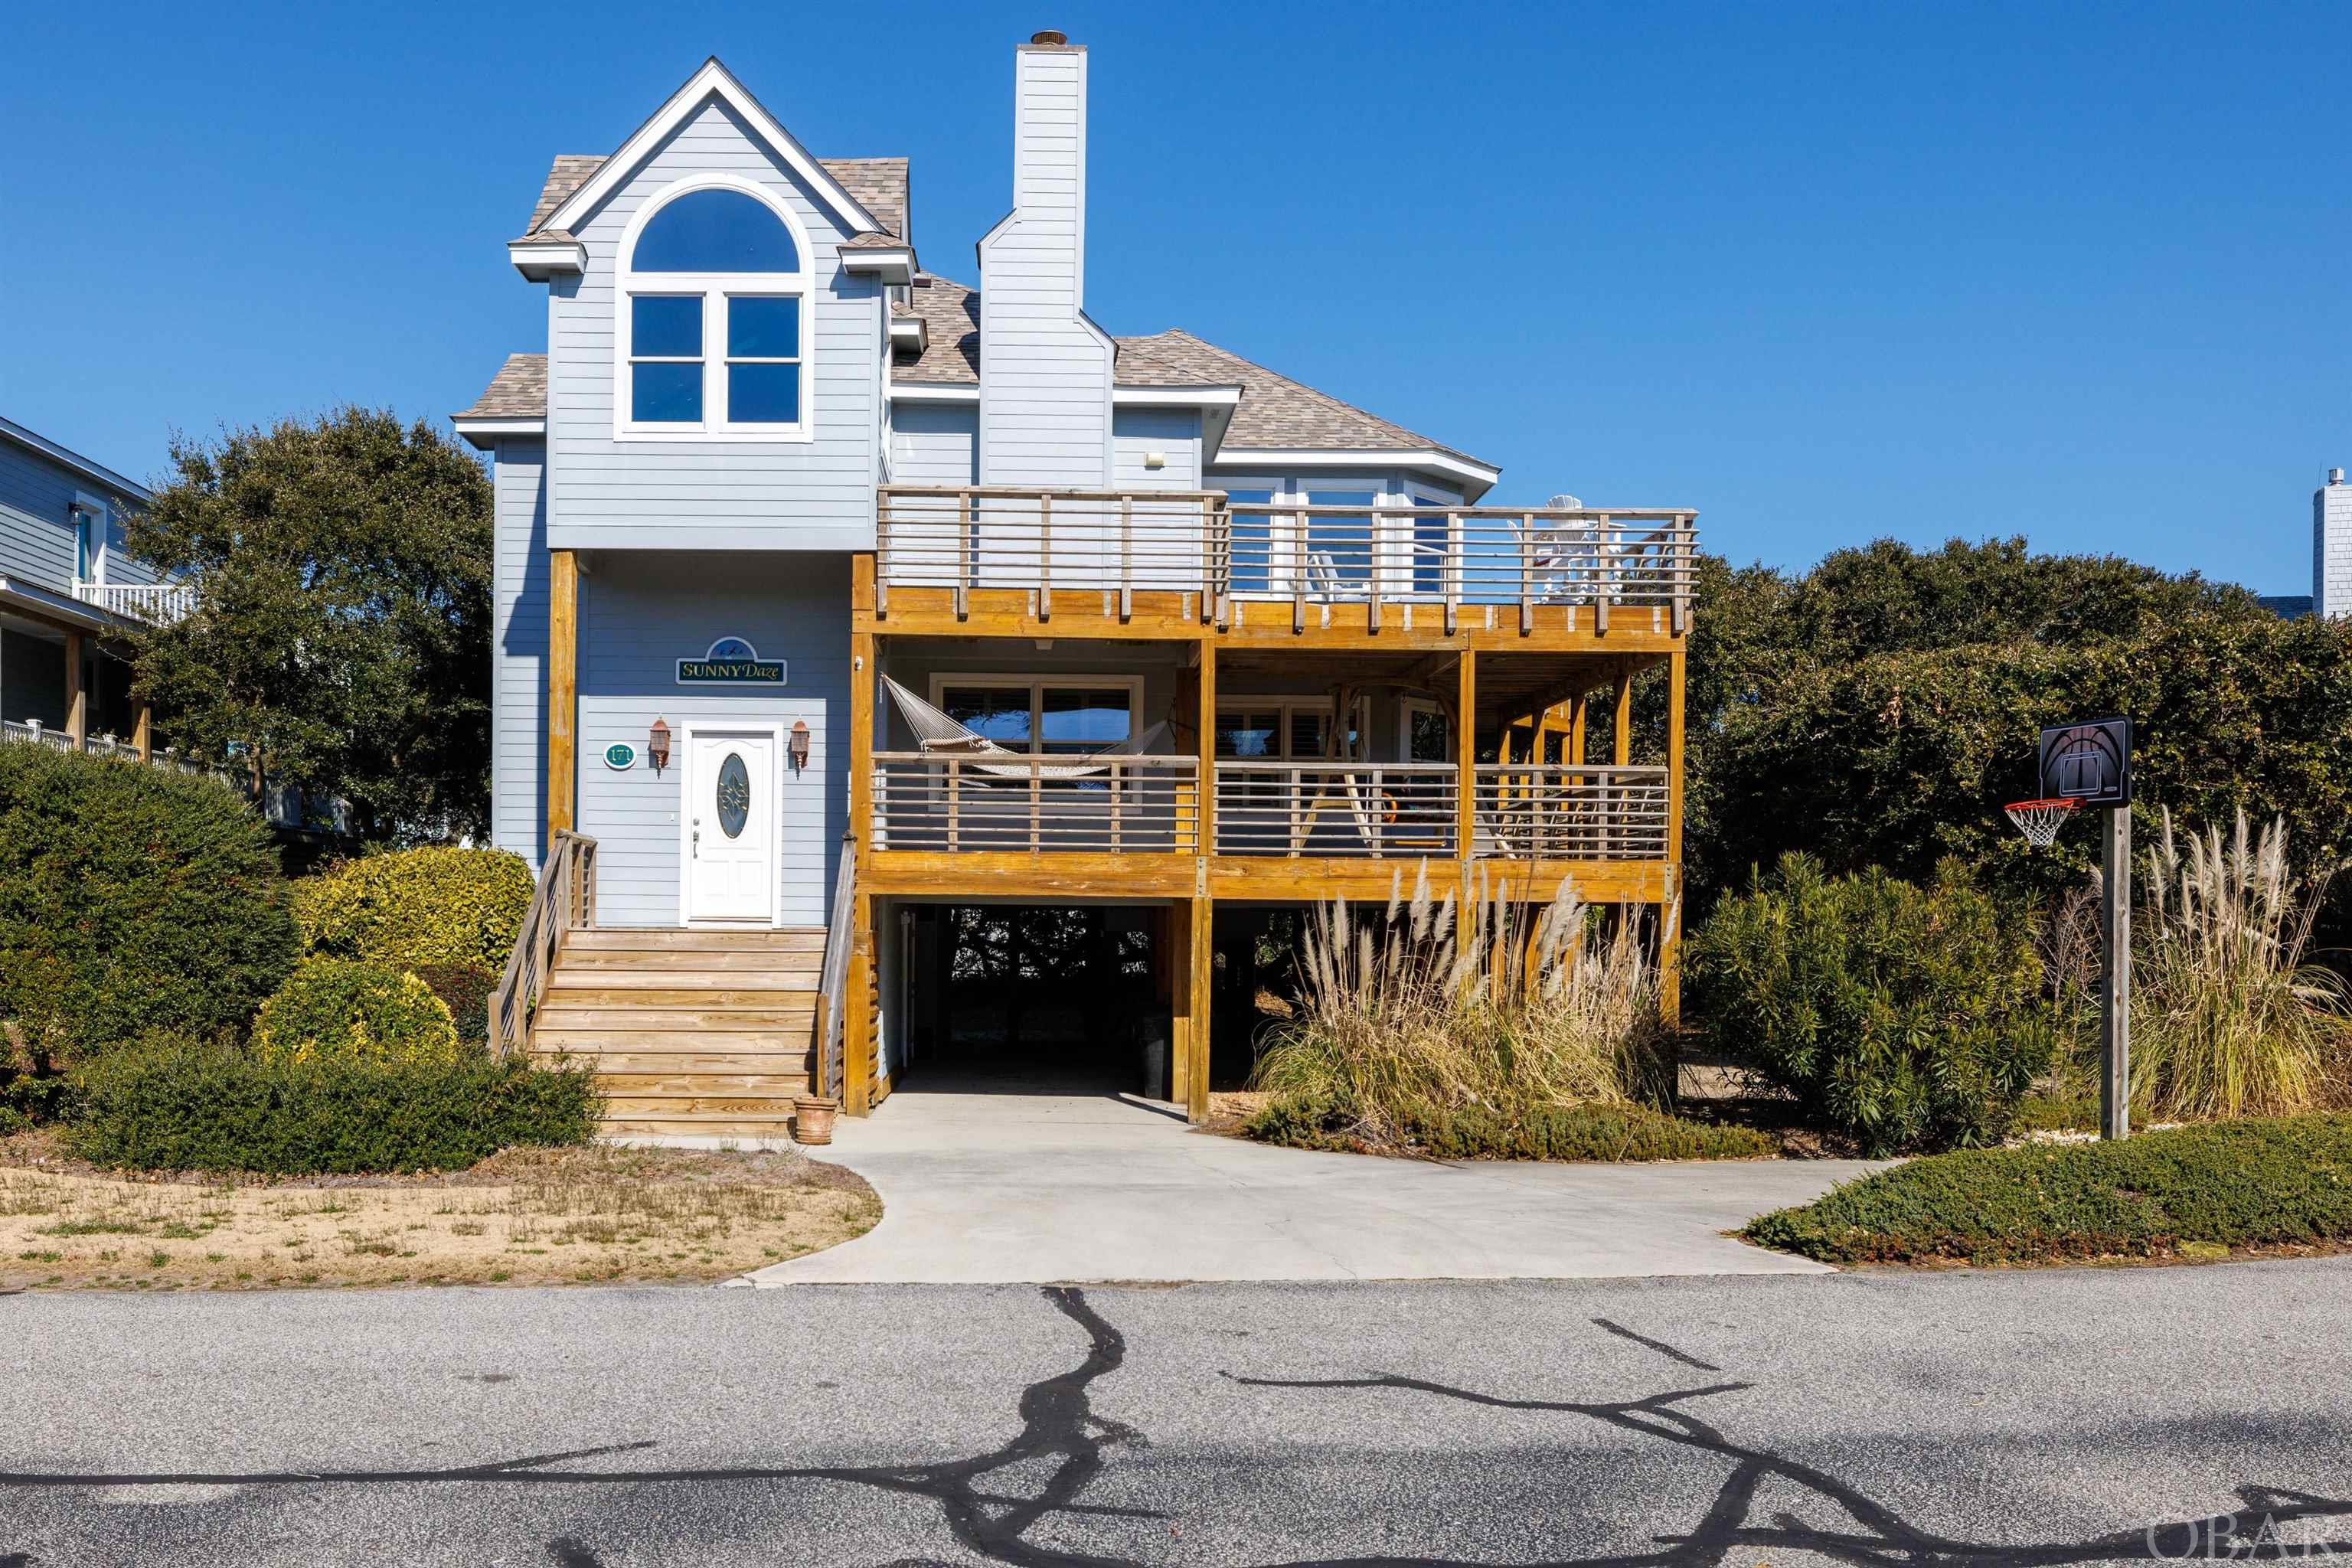 With sparkling ocean views inside and out, resort-style neighborhood amenities, and easy access to idyllic downtown Duck shops and restaurants, this wonderful 4 BR | 3.5 BA home in Schooner Ridge is what OBX dreams are made of!  As you enter you'll be greeted by a gracious front foyer with beachy colors and a tiled entry.  Head upstairs to the top floor kitchen, living and dining area where gorgeous ocean views await!  The freshly-painted kitchen is crisp and clean, with quartz countertops, large pantry, and a breakfast bar perfect for serving up appetizers or grabbing a quick snack.  The kitchen flows seamlessly to the dining room, surrounded by windows for beautiful views from every seat at the table.  The living area provides a spacious yet cozy hangout, with an electric fireplace insert for added ambiance on winter evenings, or head up to the ships watch (complete with wet bar) for a lively game night.  Step outside to watch the sunrise over the ocean on your massive sun deck or enjoy a golden hour cocktail in the shade of your covered deck space. The top level also features a large powder room as well as a well-appointed primary suite and private bath with double vanity.  On the mid-level, you'll find a cozy lounge perfect for watching a late-night movie, along with two nicely-appointed bedrooms sharing a large hall bath with double vanity.  A second primary suite completes the mid level with private ensuite bath.  The laundry room is also conveniently located on this level, along with expansive covered porches and a soothing hot tub.  Catch the afternoon ocean breeze as you swing or relax in your hammock.  The ground level offers a tiled dry entry and abundant storage, inside and out, as well as a double outdoor shower.  Located in amenity-rich and highly sought after Schooner Ridge, offering a community beach access, oceanfront outdoor pool, indoor pool, tennis and racquetball courts, fitness center, gameroom, and playground, you’ll have all the luxuries of resort-style living right outside your door.  Come see what makes this home - and neighborhood - so special...book your tour today!